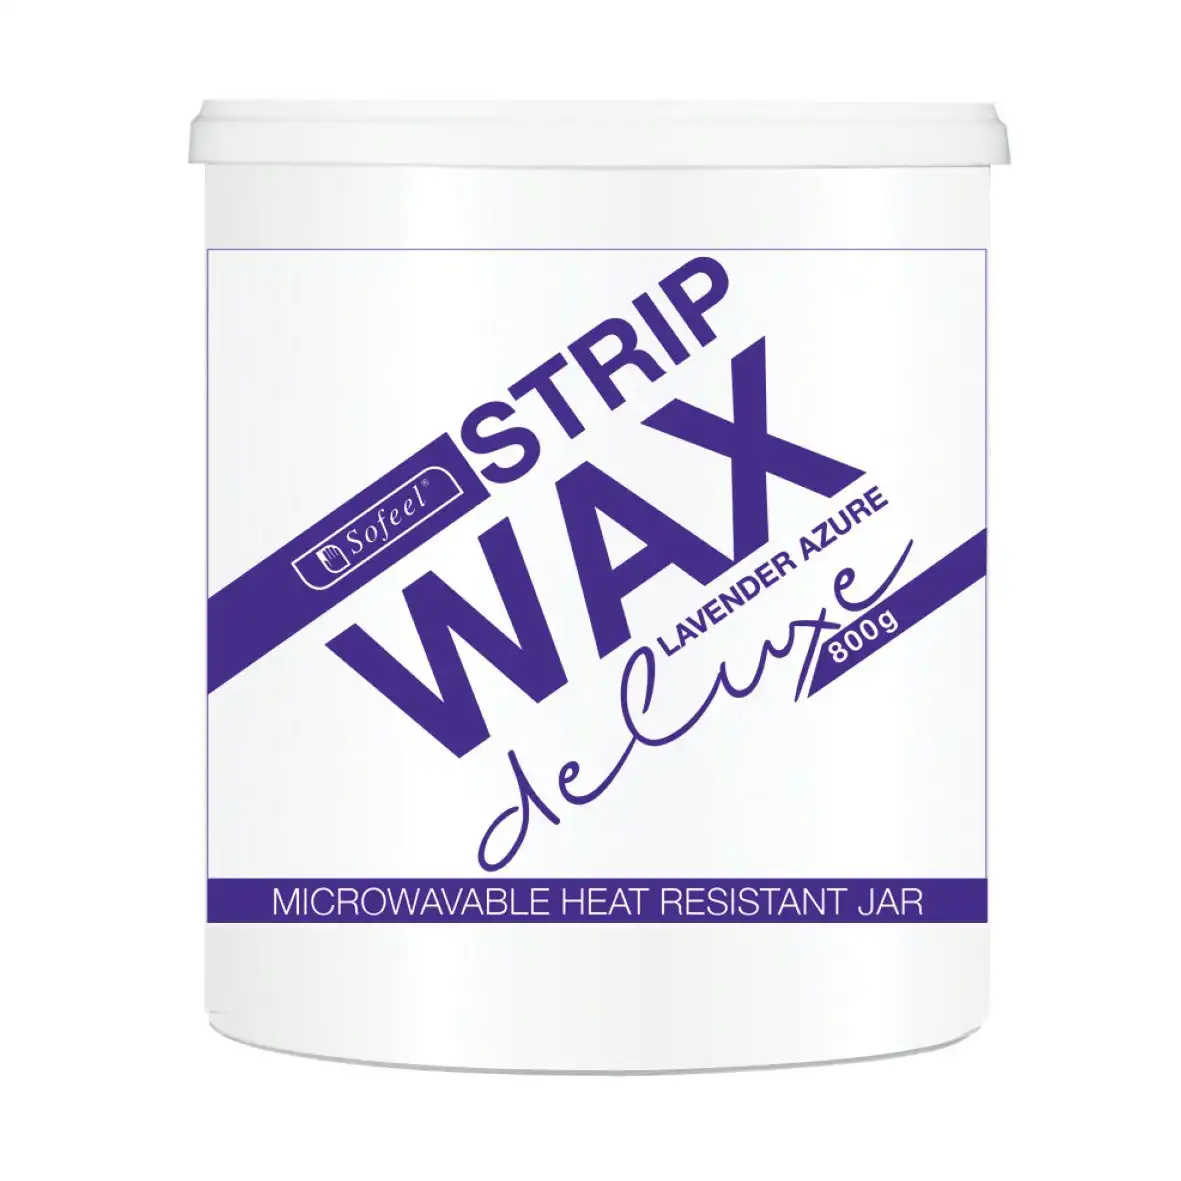 Sofeel Strip Wax Deluxe Lavender Azure Scent Dark Blue Synthetic Shimmer Resin 800g